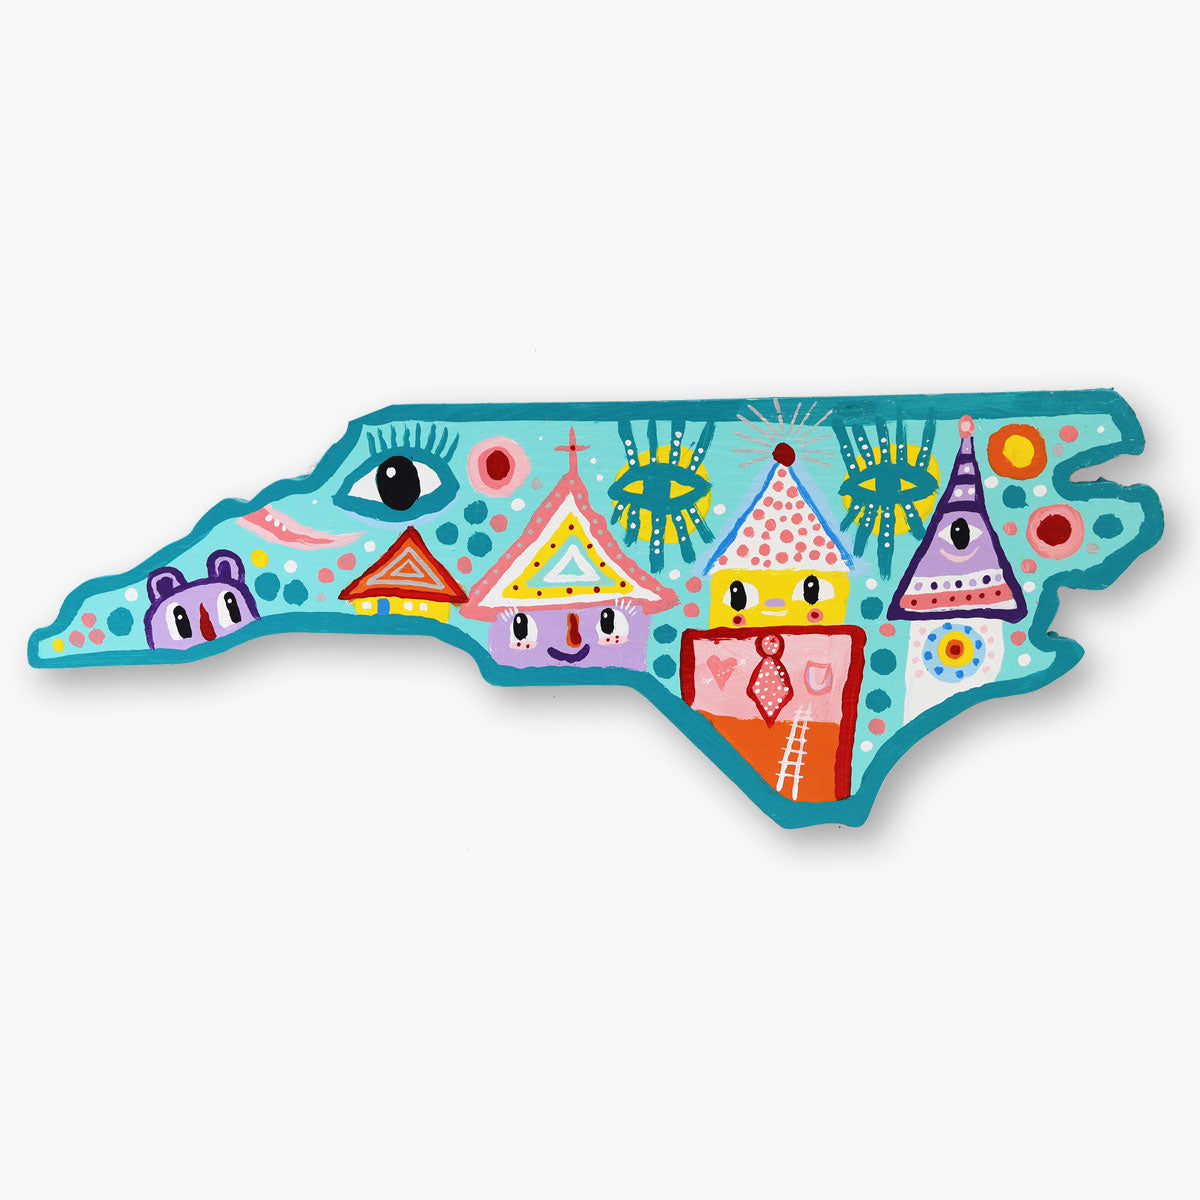 Artsuite - Kyle Brooks - NC (No. 13) - Originally from just outside of Atlanta, Georgia, these North Carolina themed works were inspired by his travels through the state, the people he has met and most recently by a visit to the Vollis Simpson Whirligig park in downtown Wilson, NC.